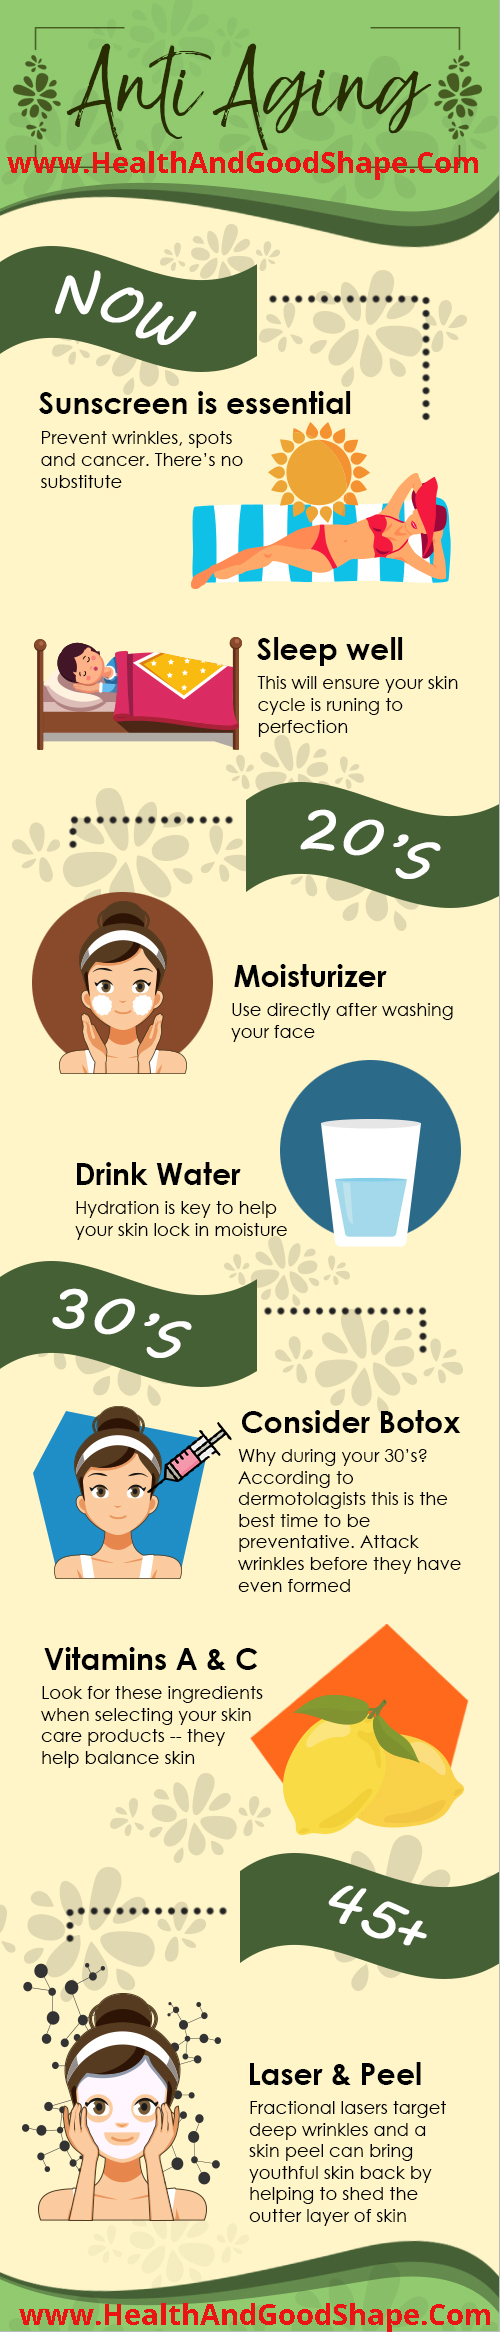 anti aging infographic